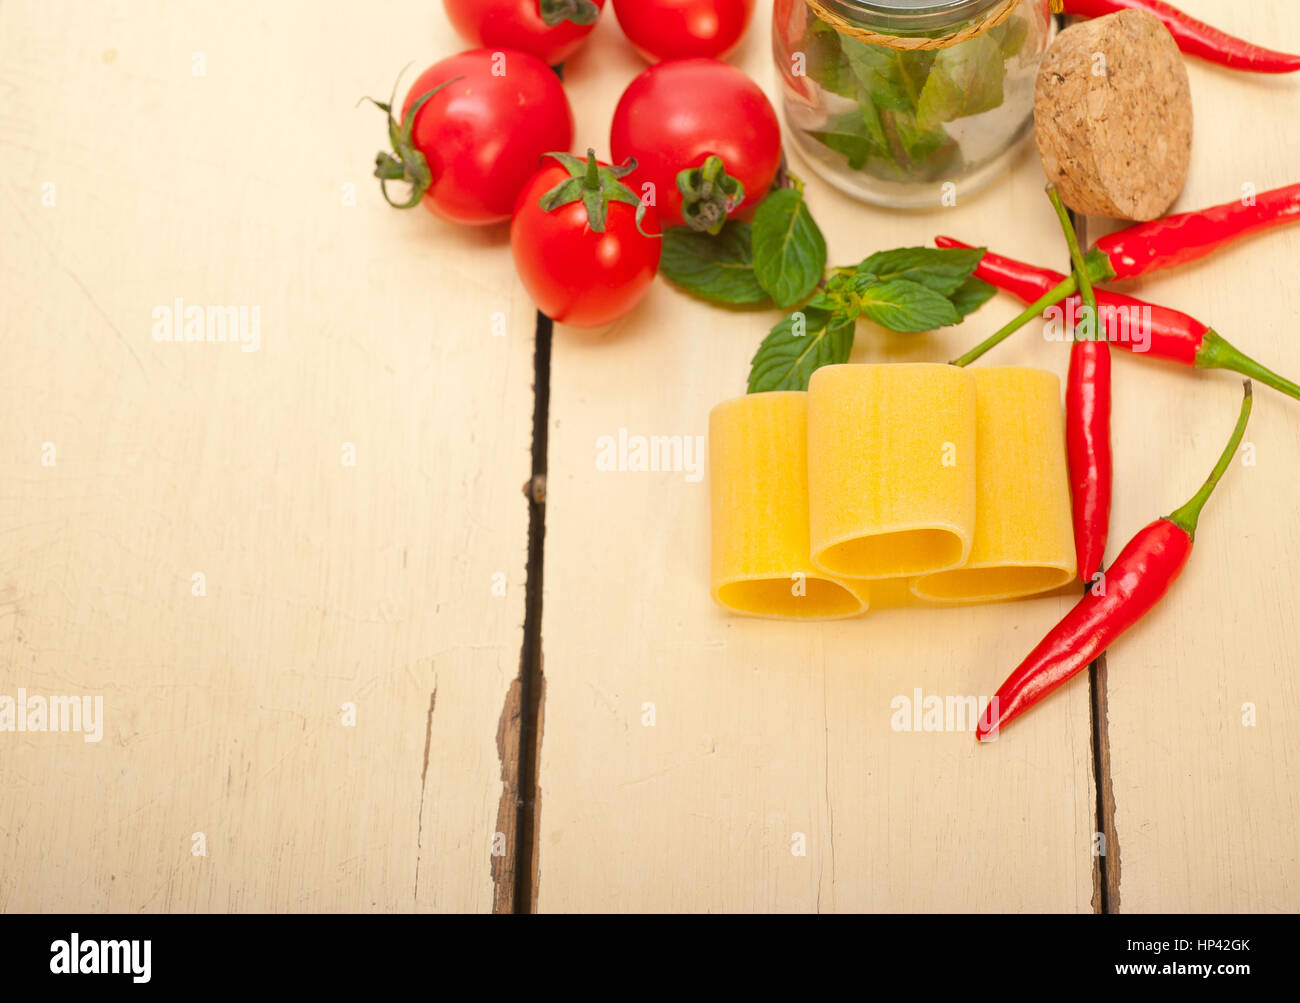 Italian pasta paccheri or schiaffoni with tomato mint and chili pepper ingredients Stock Photo